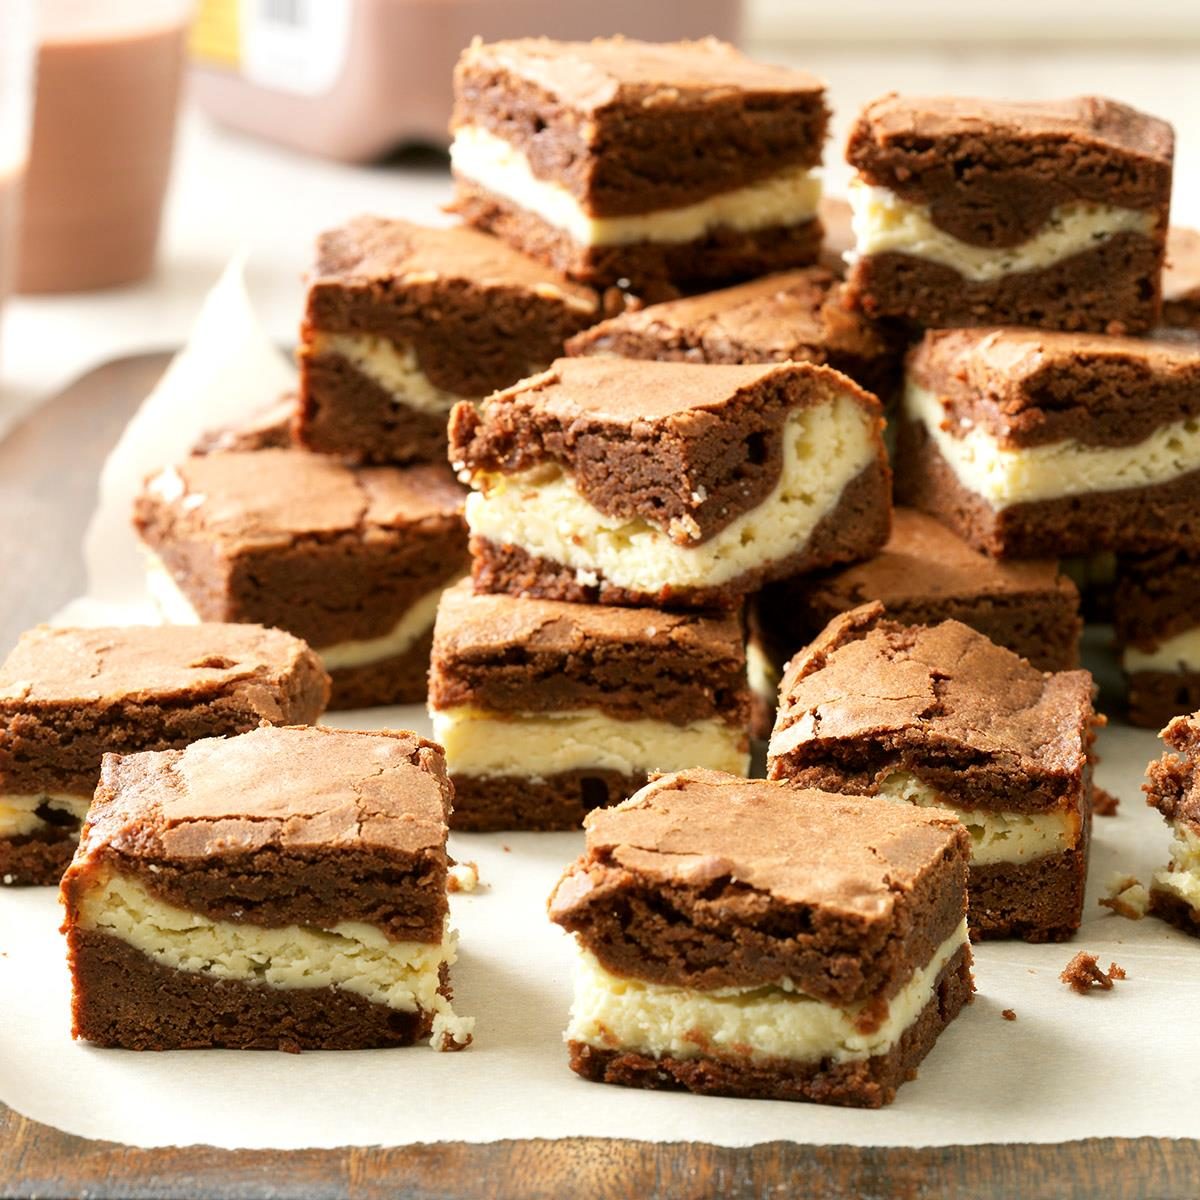 https://www.tasteofhome.com/wp-content/uploads/2018/01/Chewy-Cream-Cheese-Brownies_EXPS_H13X9BZ17_35887_D06_08_5b-10.jpg?fit=700%2C1024